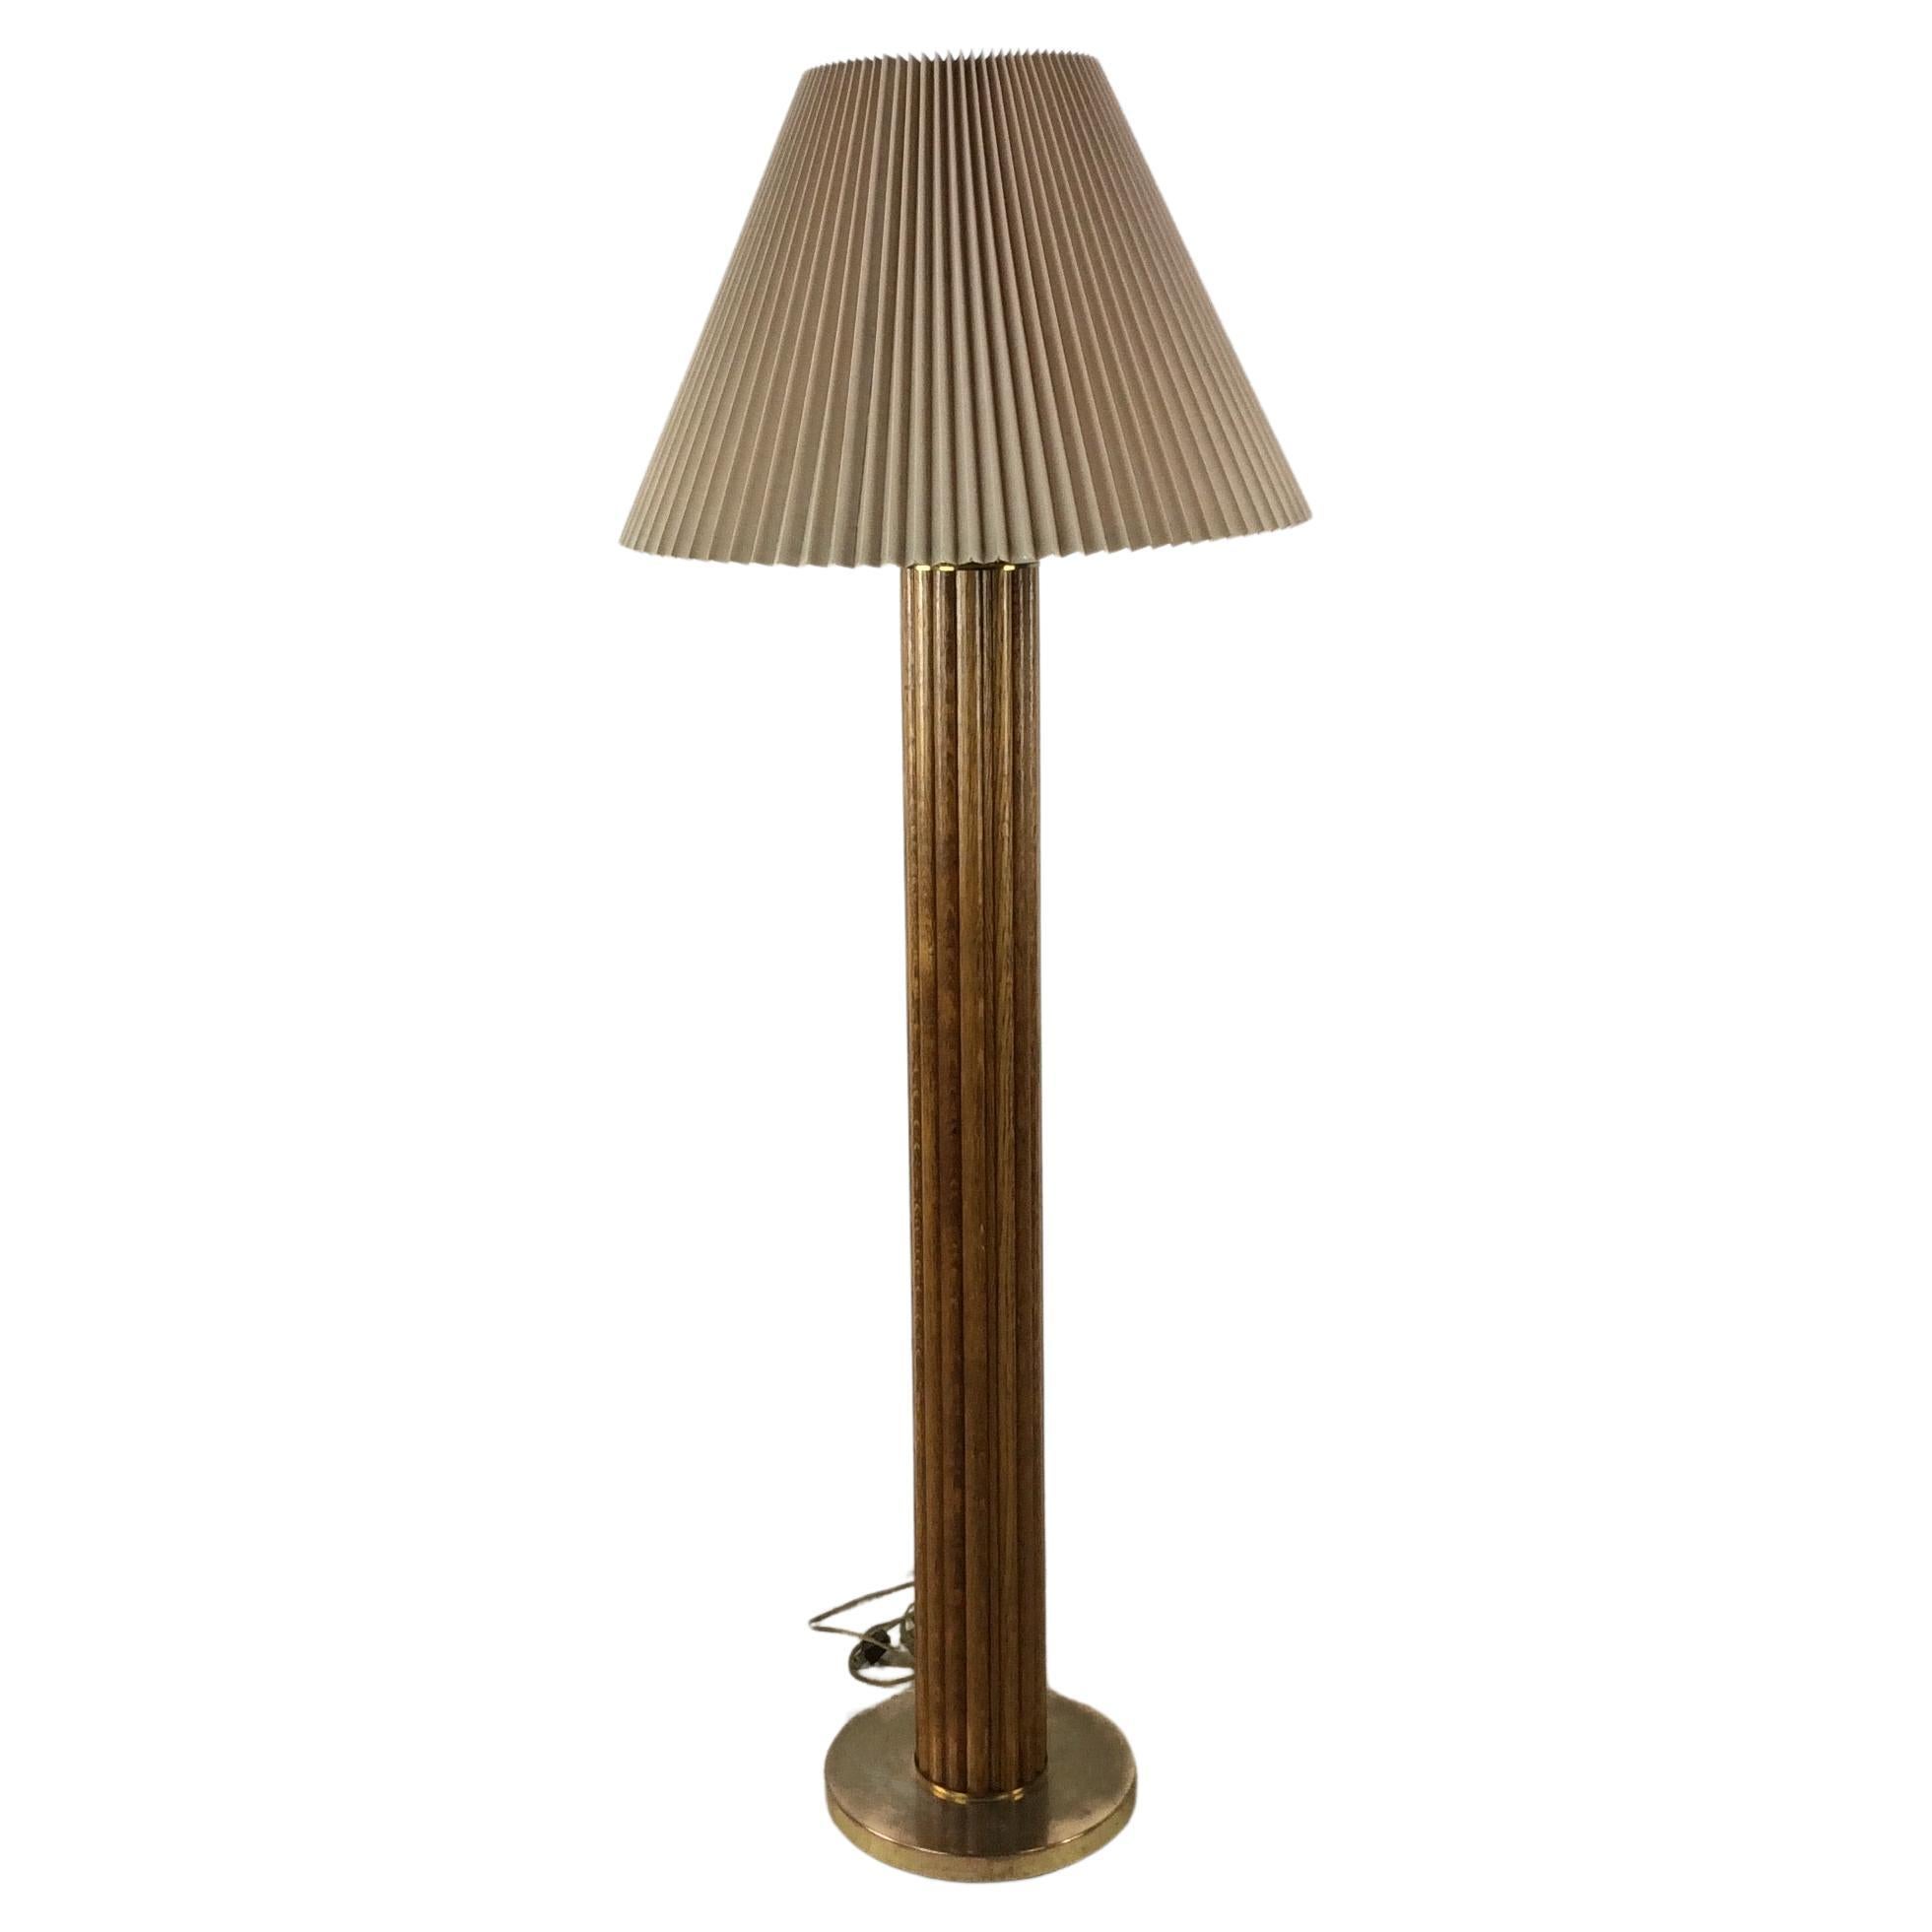 Vintage Boho Chic Rattan Floor Lamp with Pleated Shade